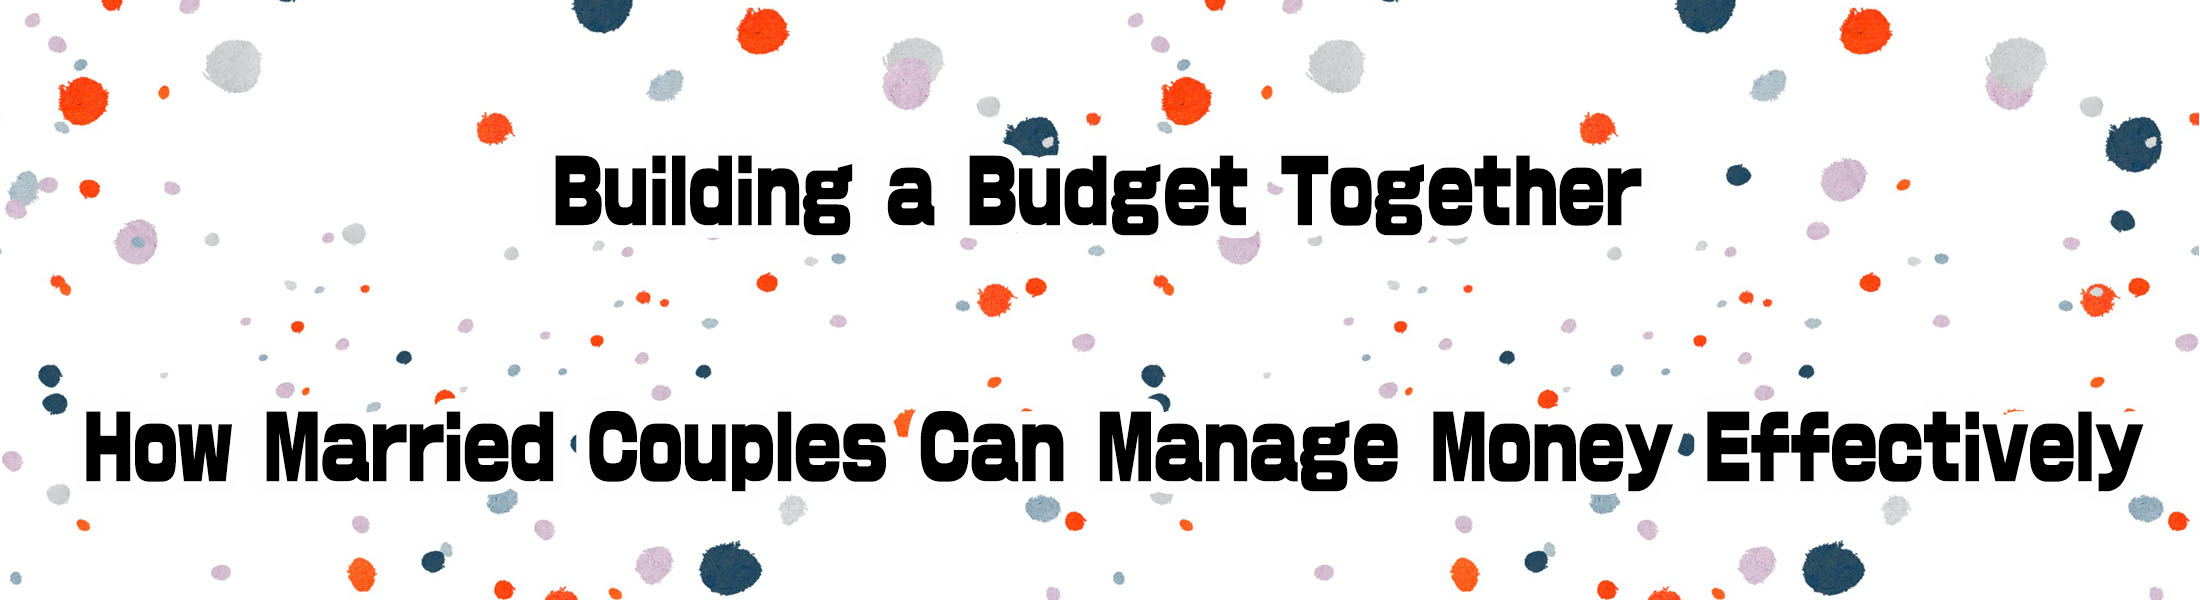 Building a Budget Together: How Married Couples Can Manage Money Effectively